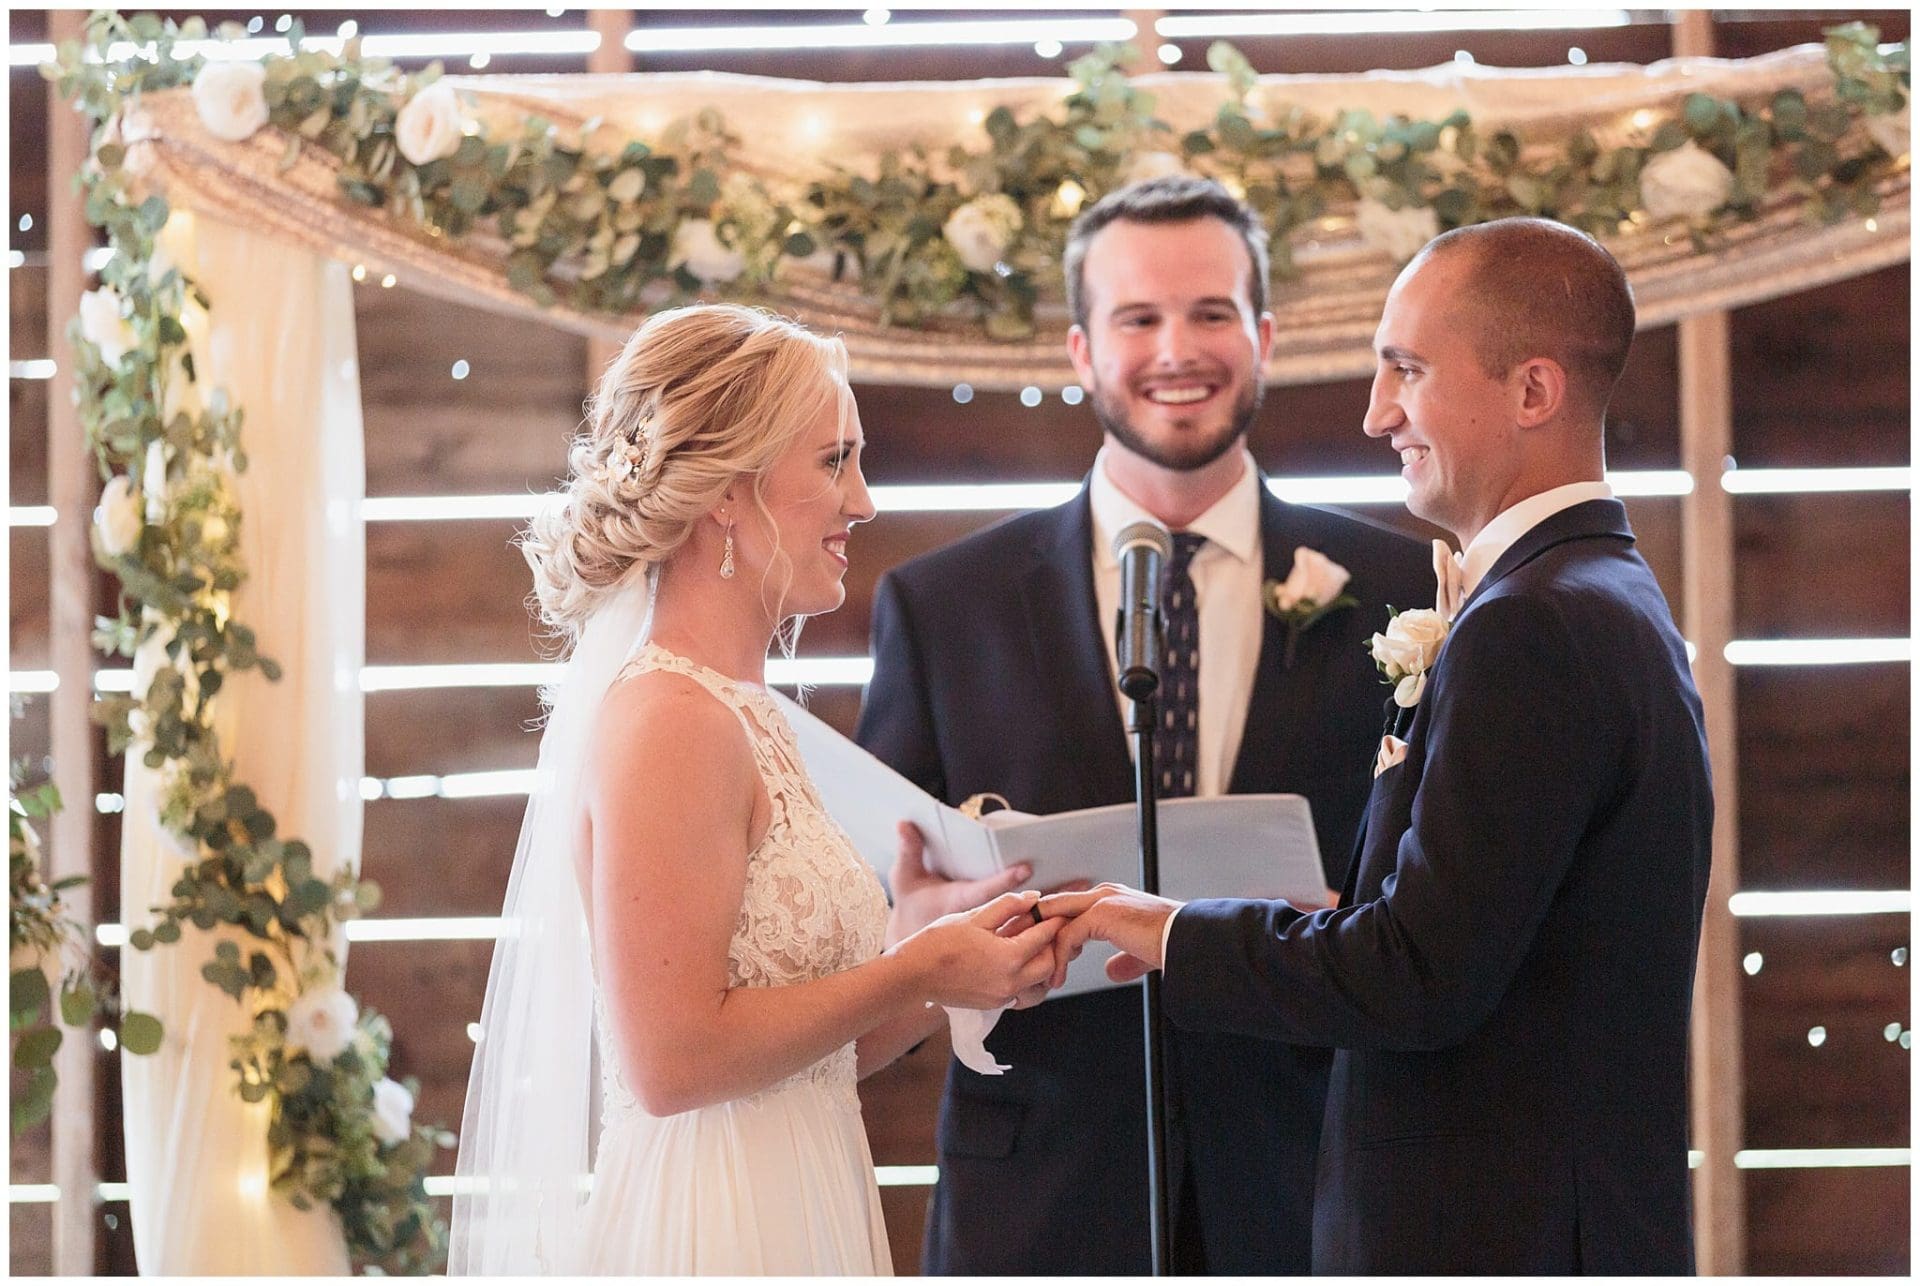 Heritage Prairie Farms Wedding - Wes Craft Photography